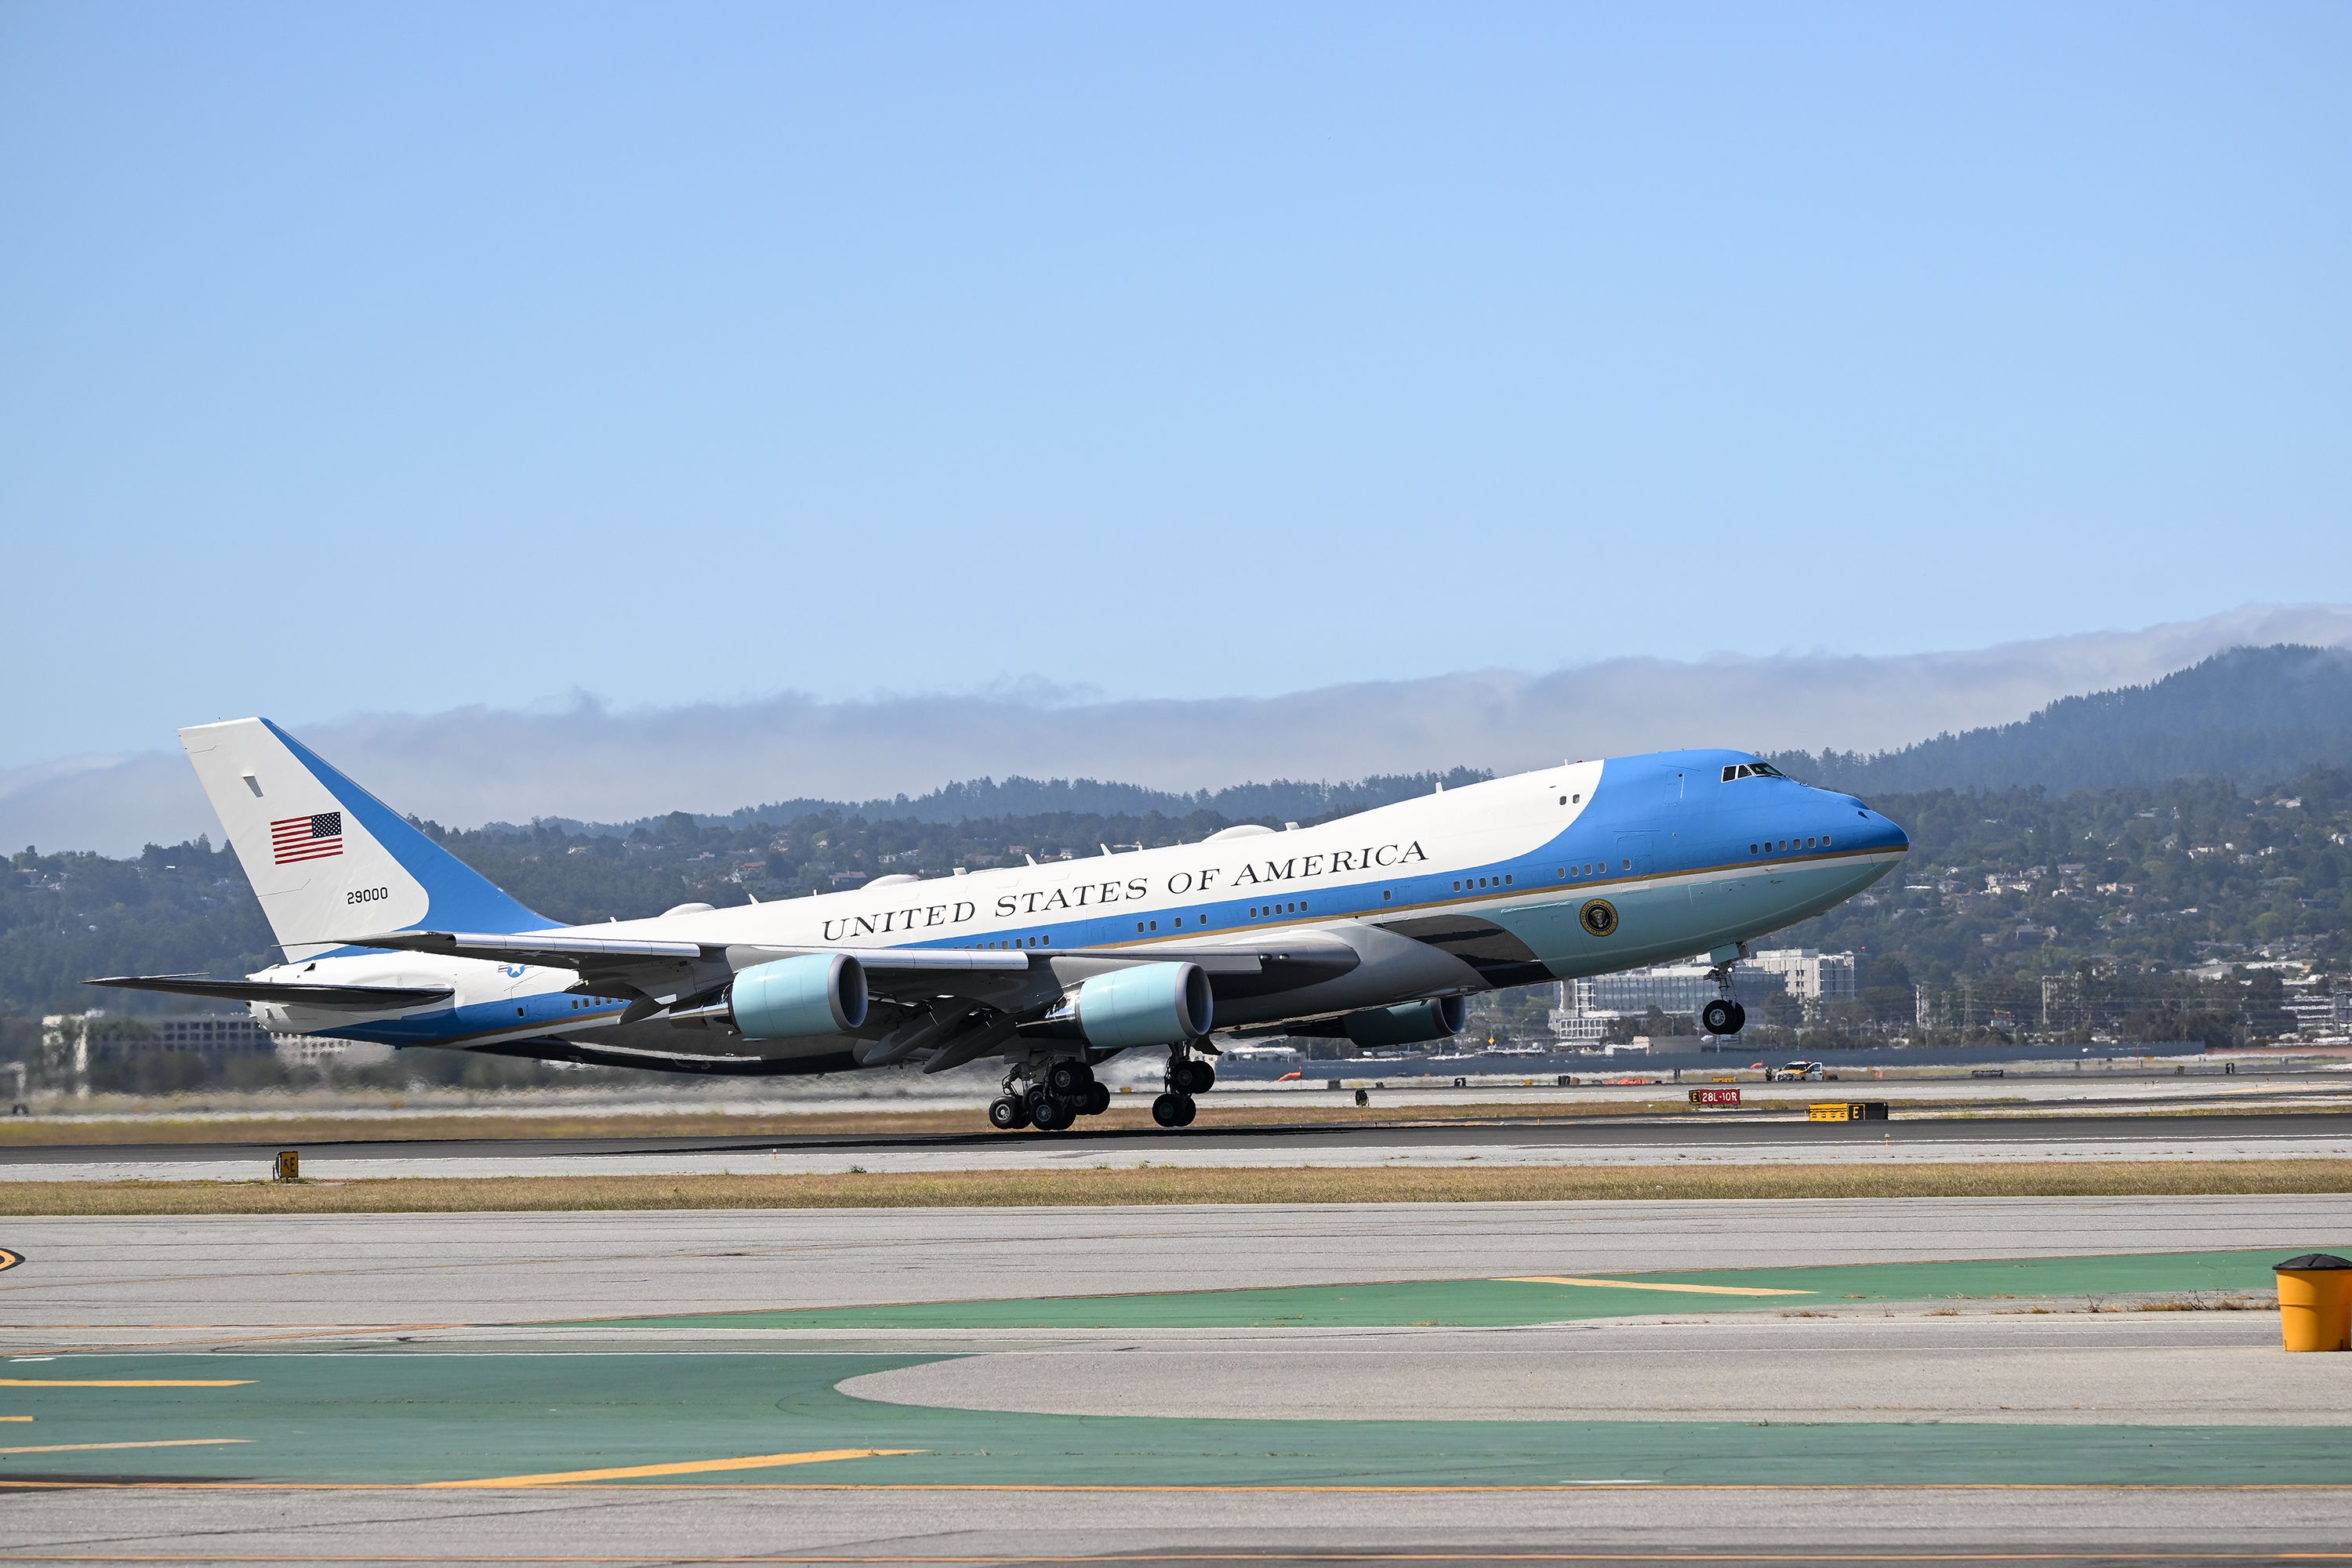 Buying a New Air Force One Is Complicated - Defense One